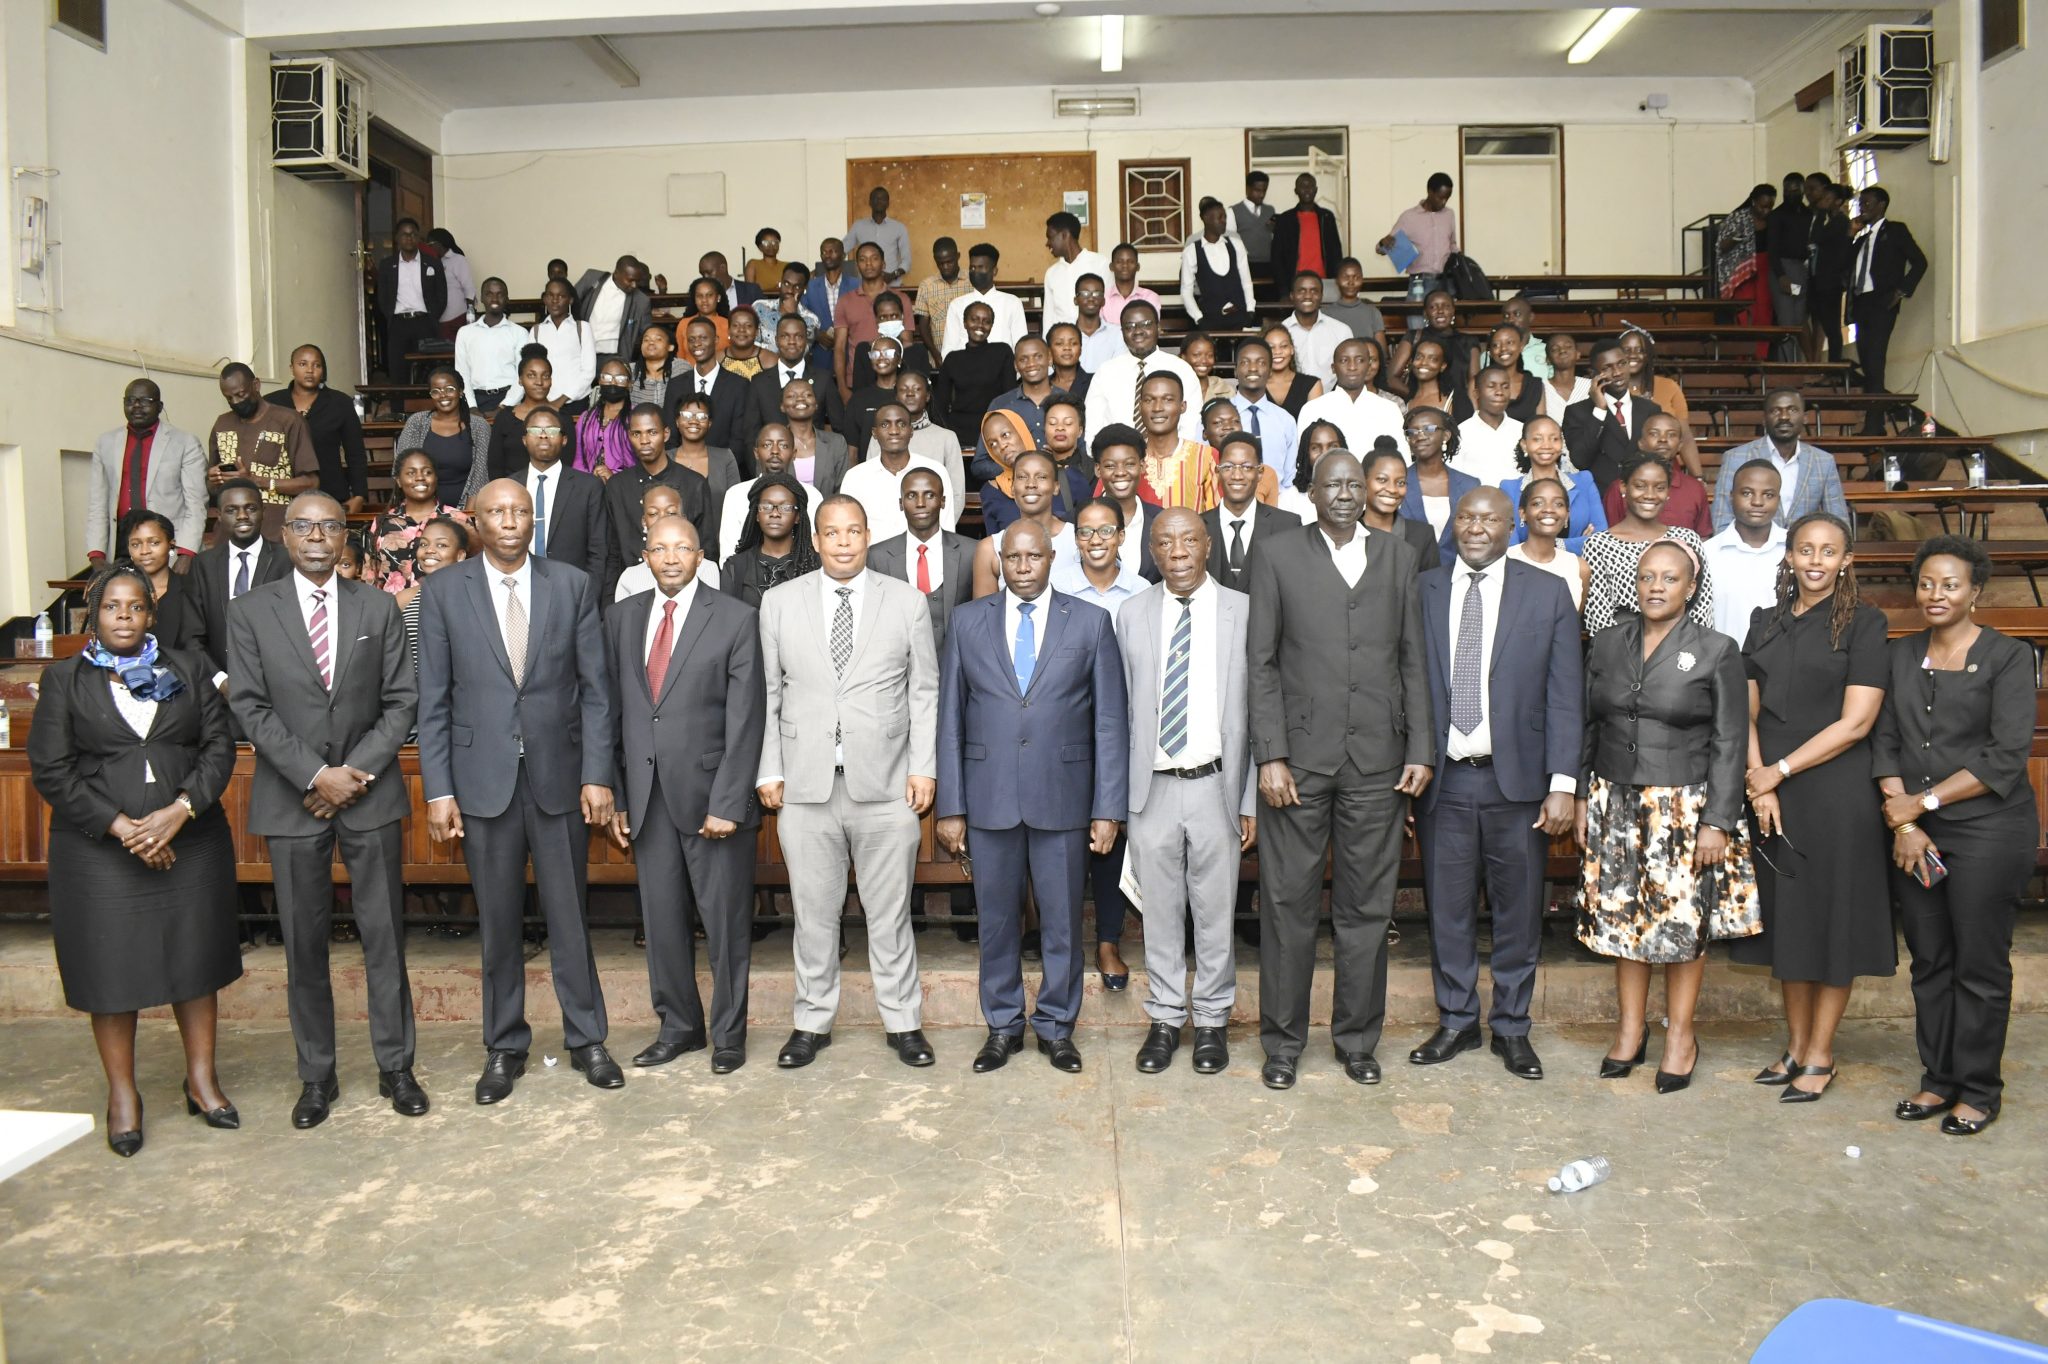 The High Level Delegation from East African Court of Justice (EACJ) poses for a group photo with the DVCFA-Prof. Henry Alinaitwe (6th L), Ag. Principal-Assoc. Prof. Ronald Naluwairo (4th L), Staff and Students at the School of Law on 30th November 2022.